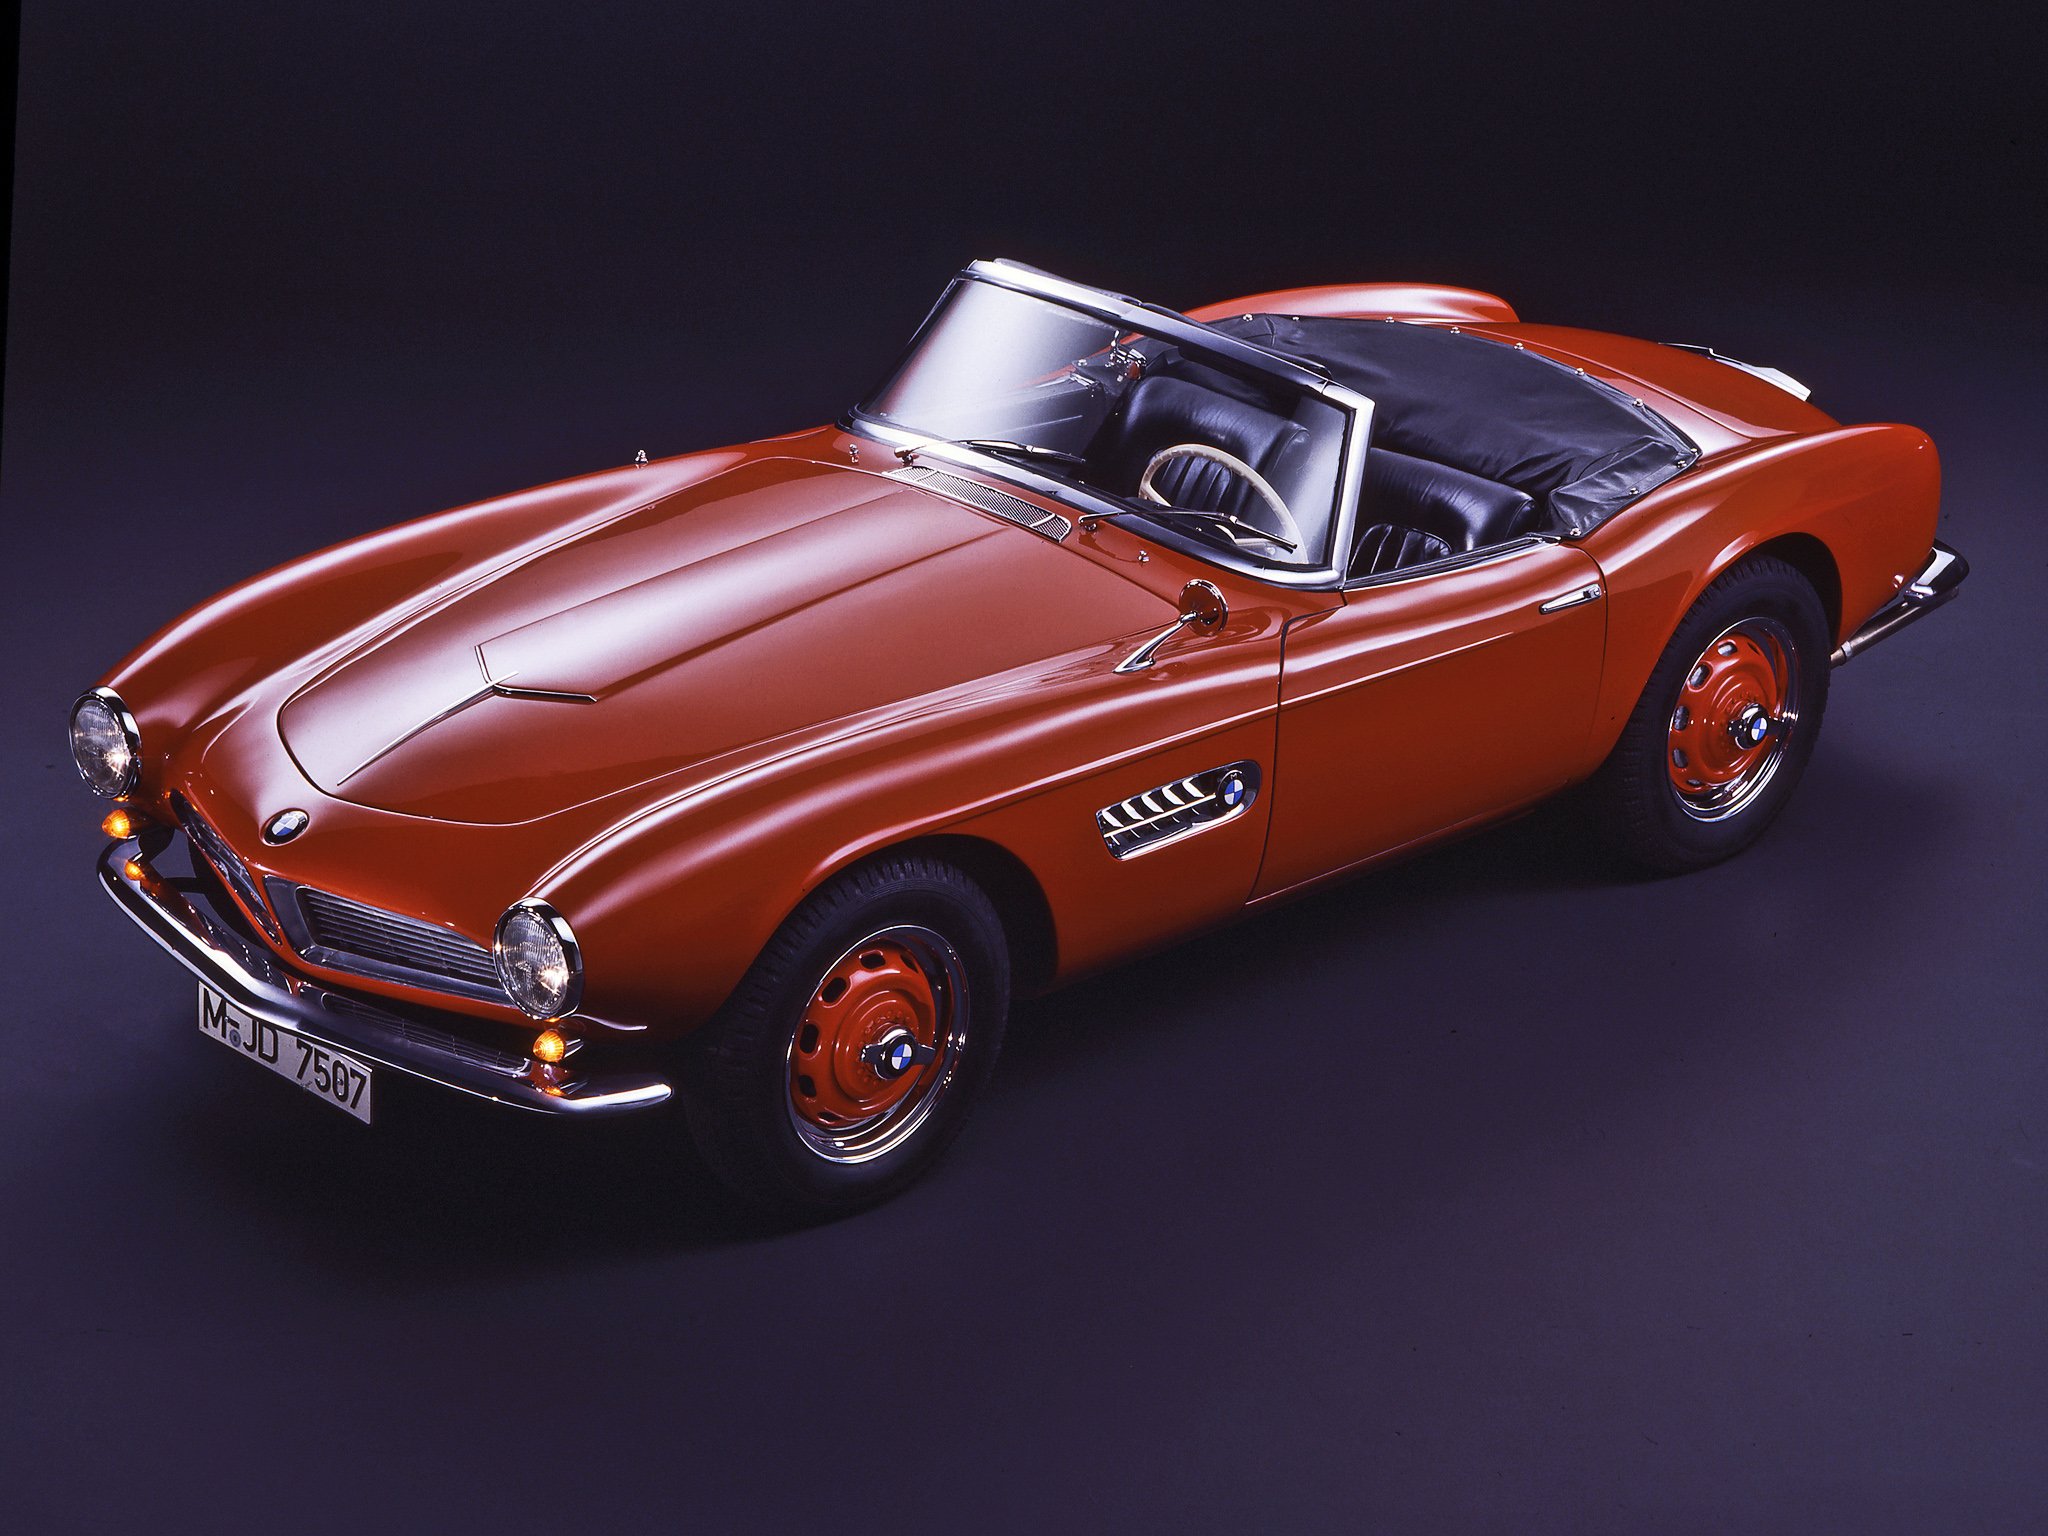 BMW 507 Roadster 1956 wallup net 677489-bmw-507-series-i-1956-classic-cars-convertible